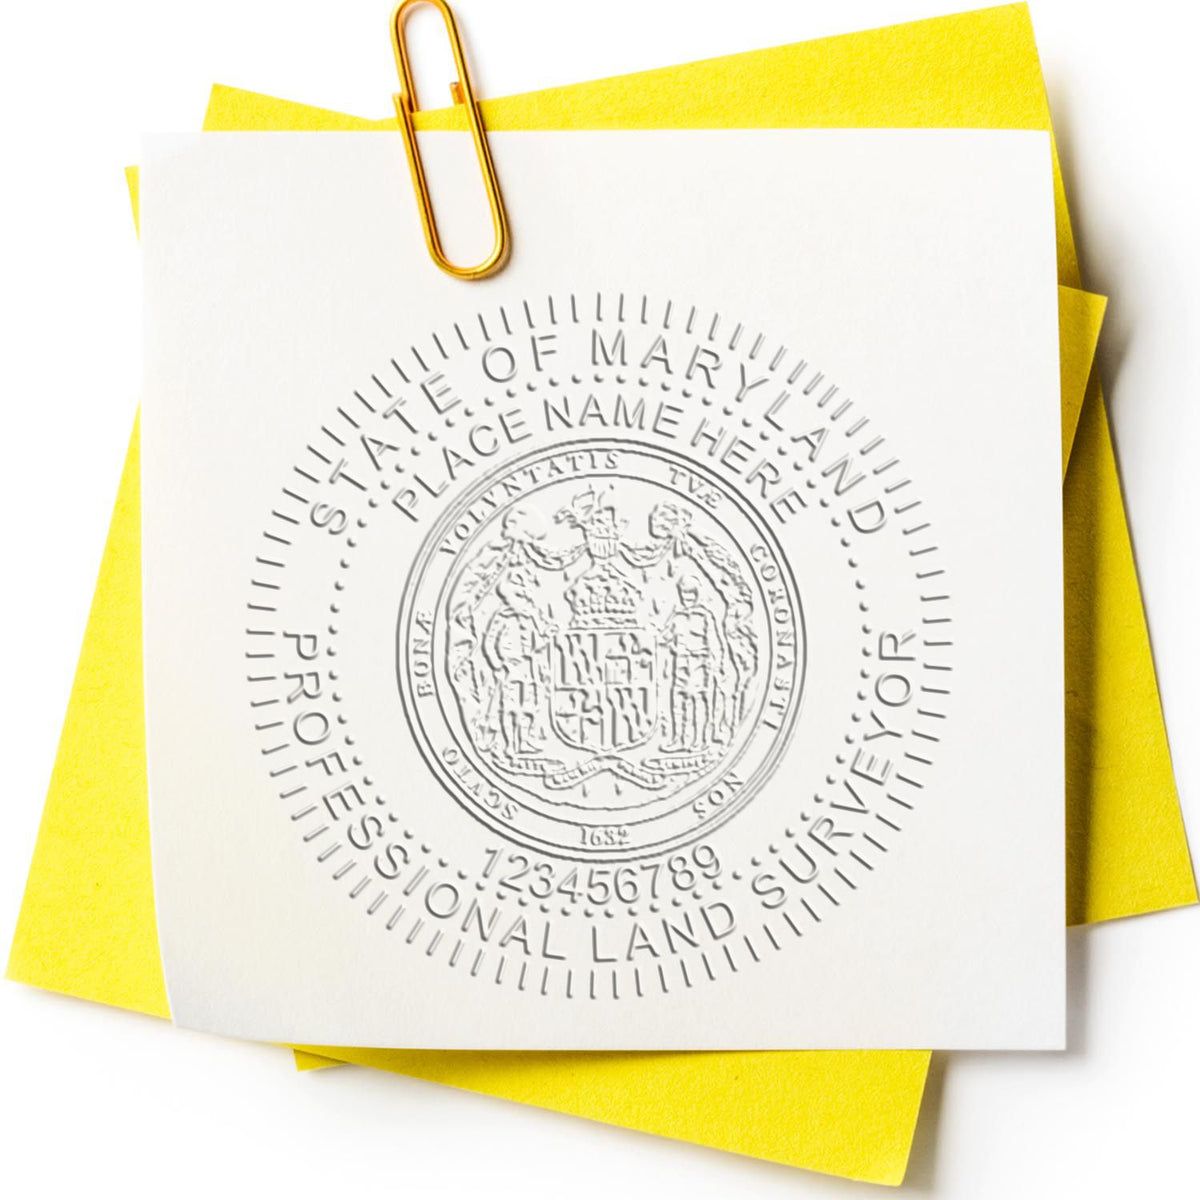 A stamped imprint of the Gift Maryland Land Surveyor Seal in this stylish lifestyle photo, setting the tone for a unique and personalized product.